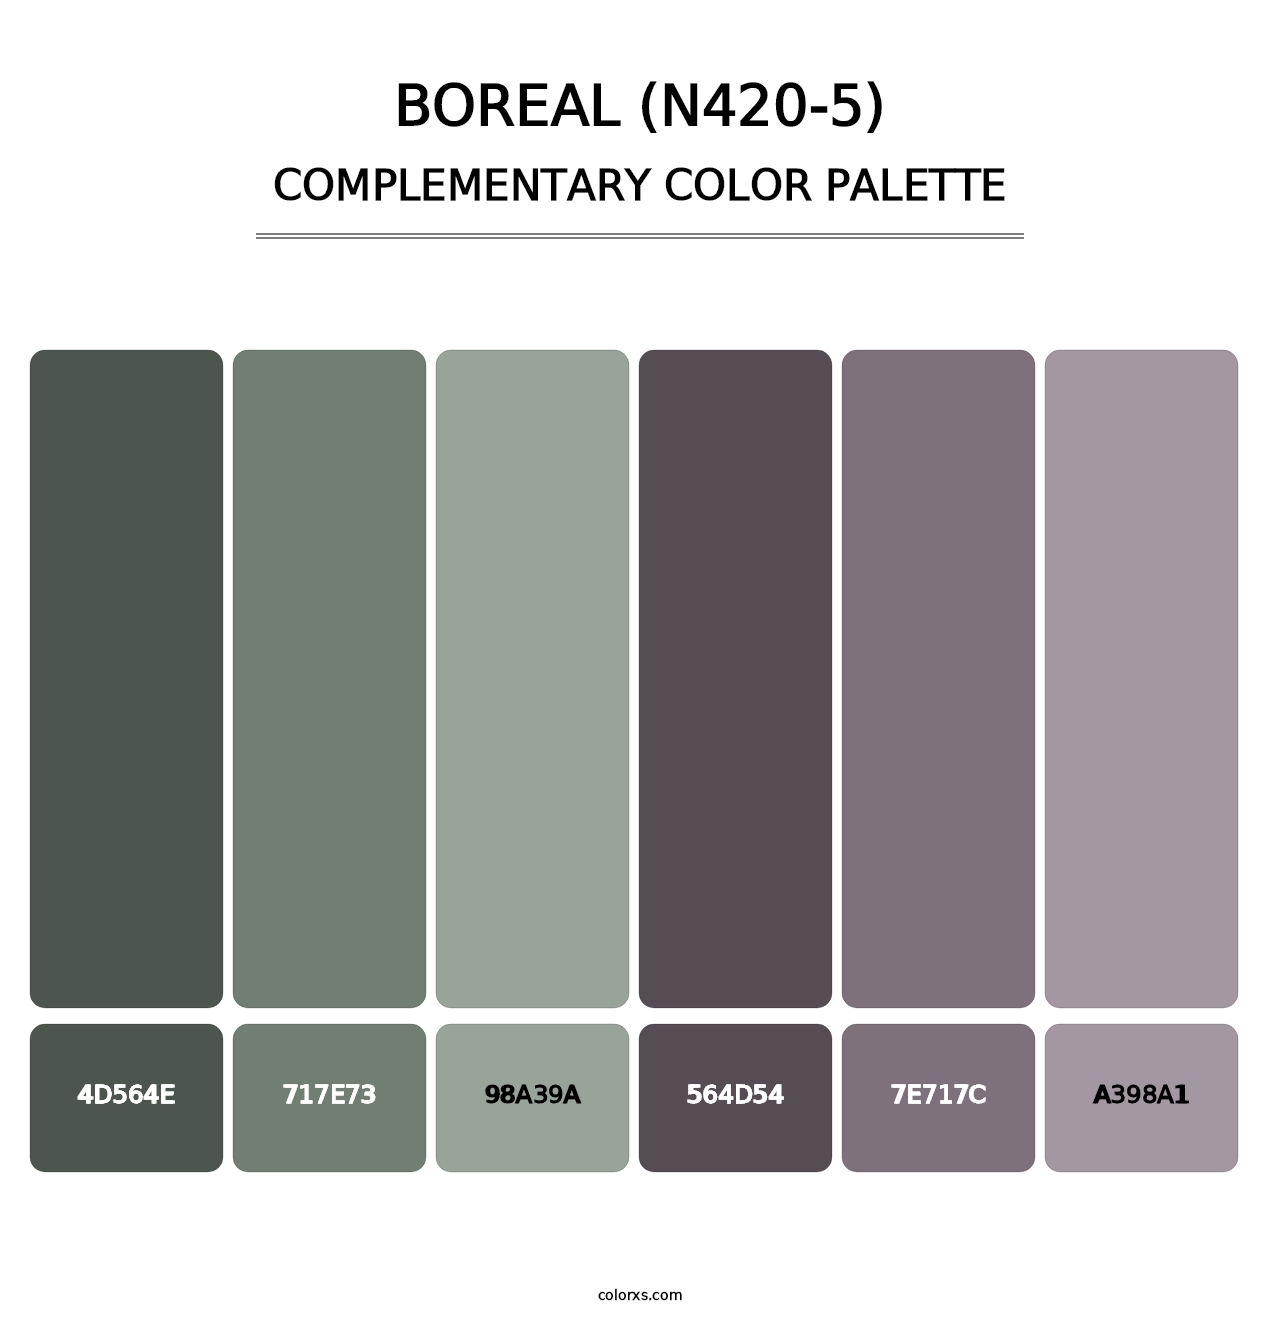 Boreal (N420-5) - Complementary Color Palette